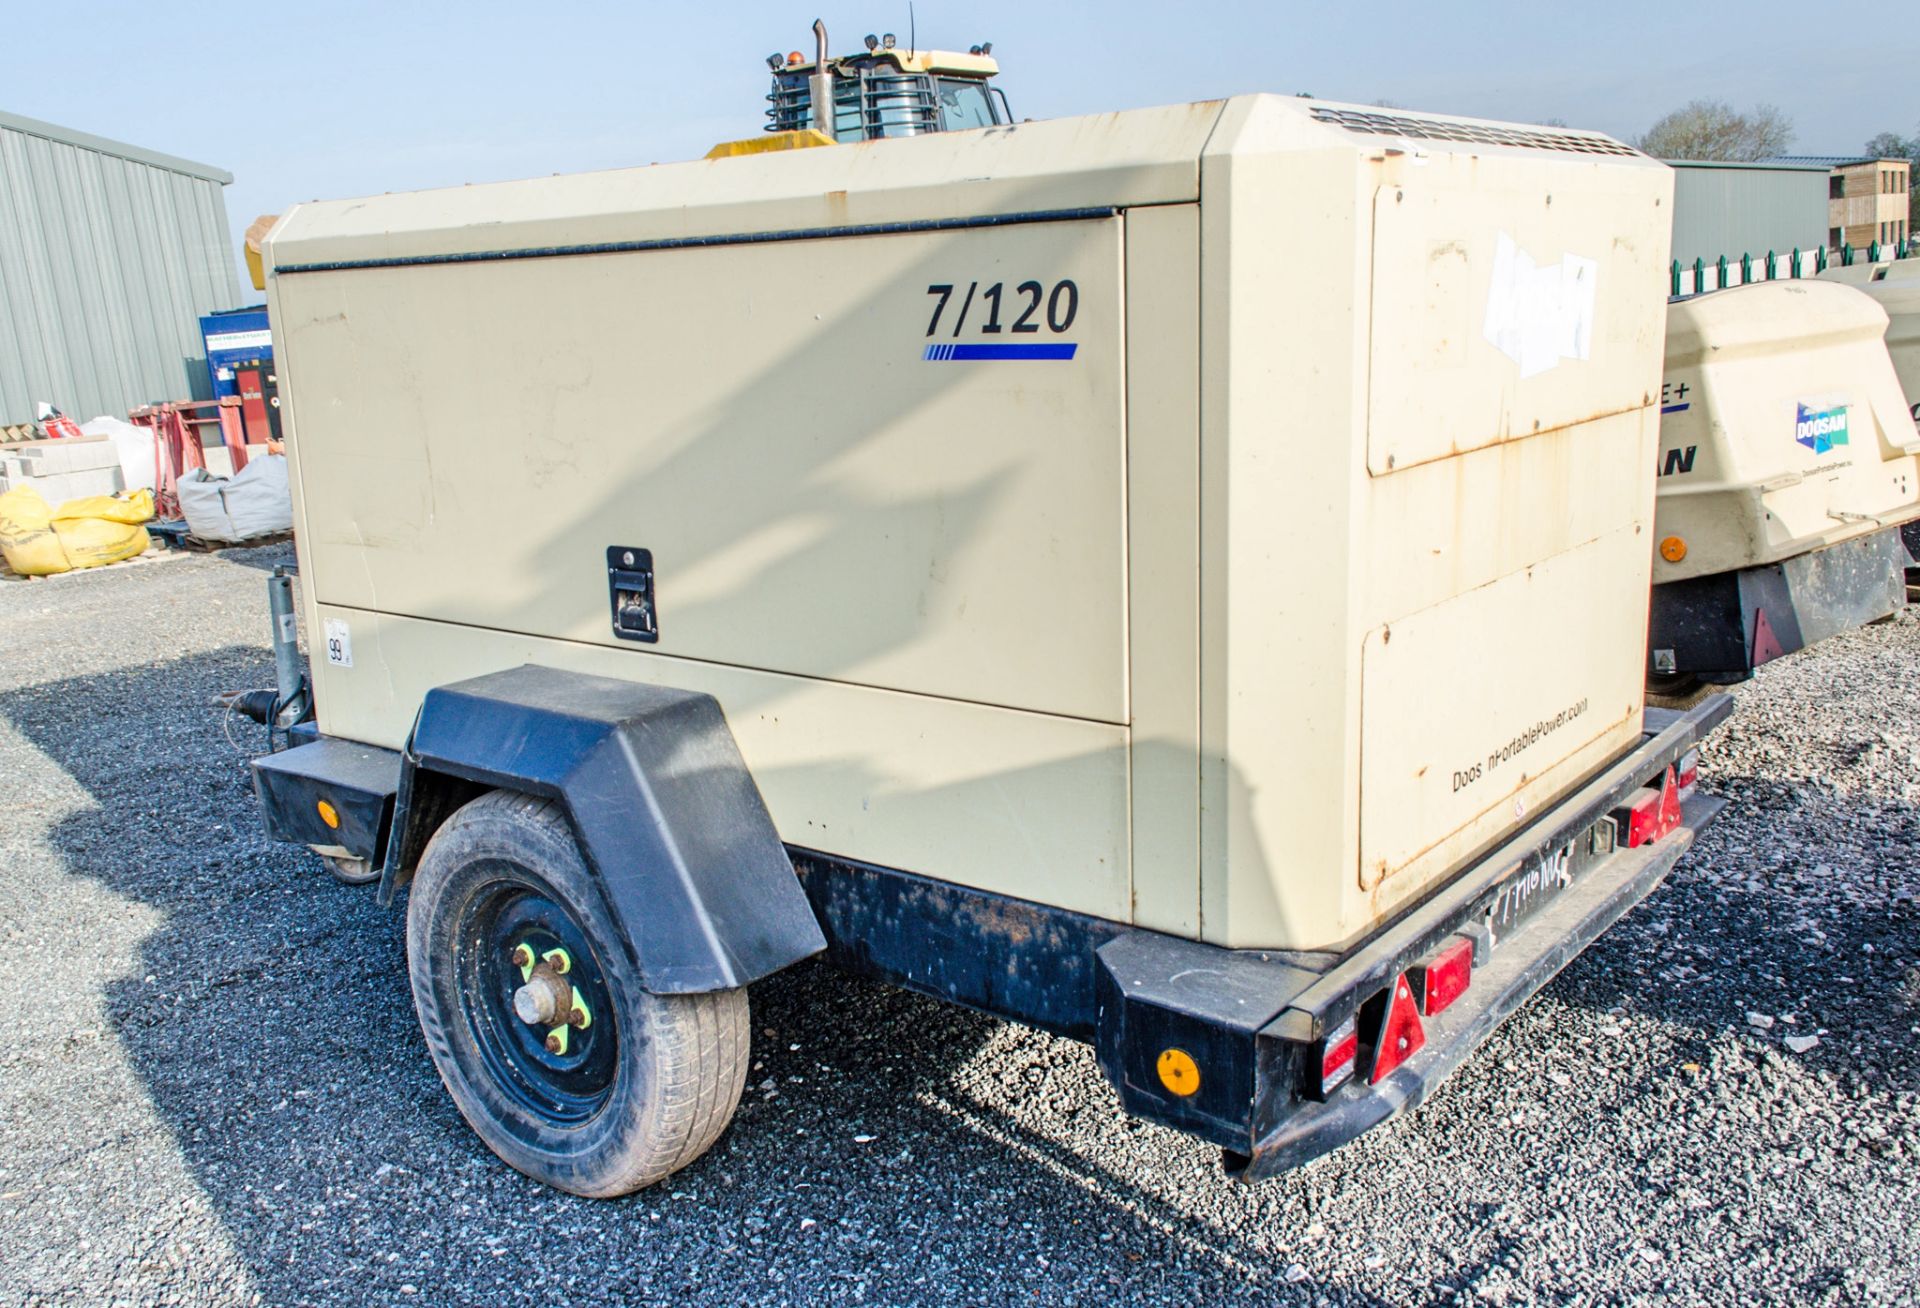 Doosan 7/120 diesel driven fast tow mobile air compressor Year: 2013 S/N: Y659479 Recorded Hours: - Image 2 of 5